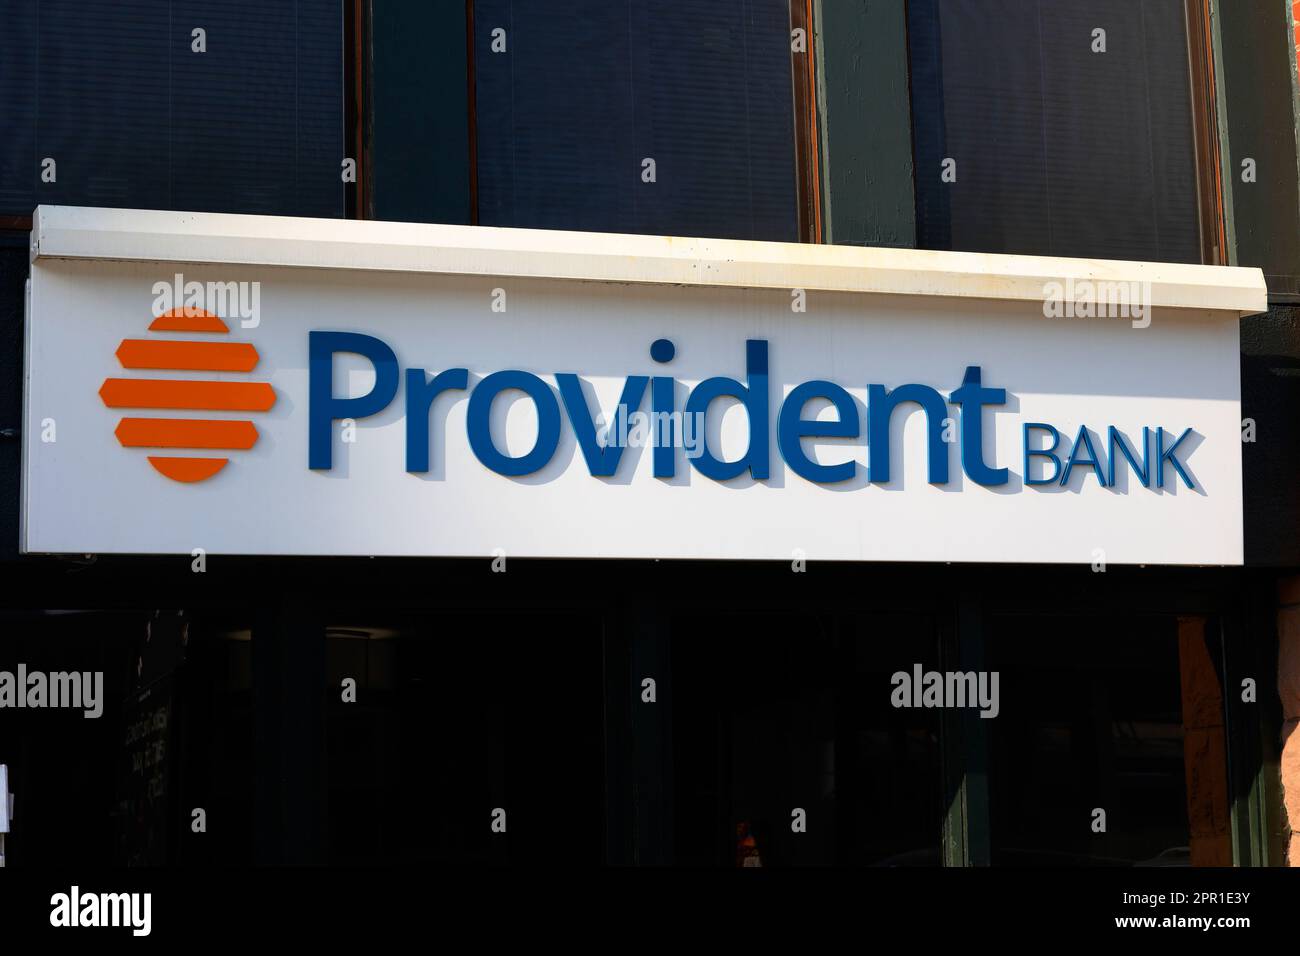 Signage for Provident Bank, a depository institution headquartered in Jersey City, New Jersey Stock Photo